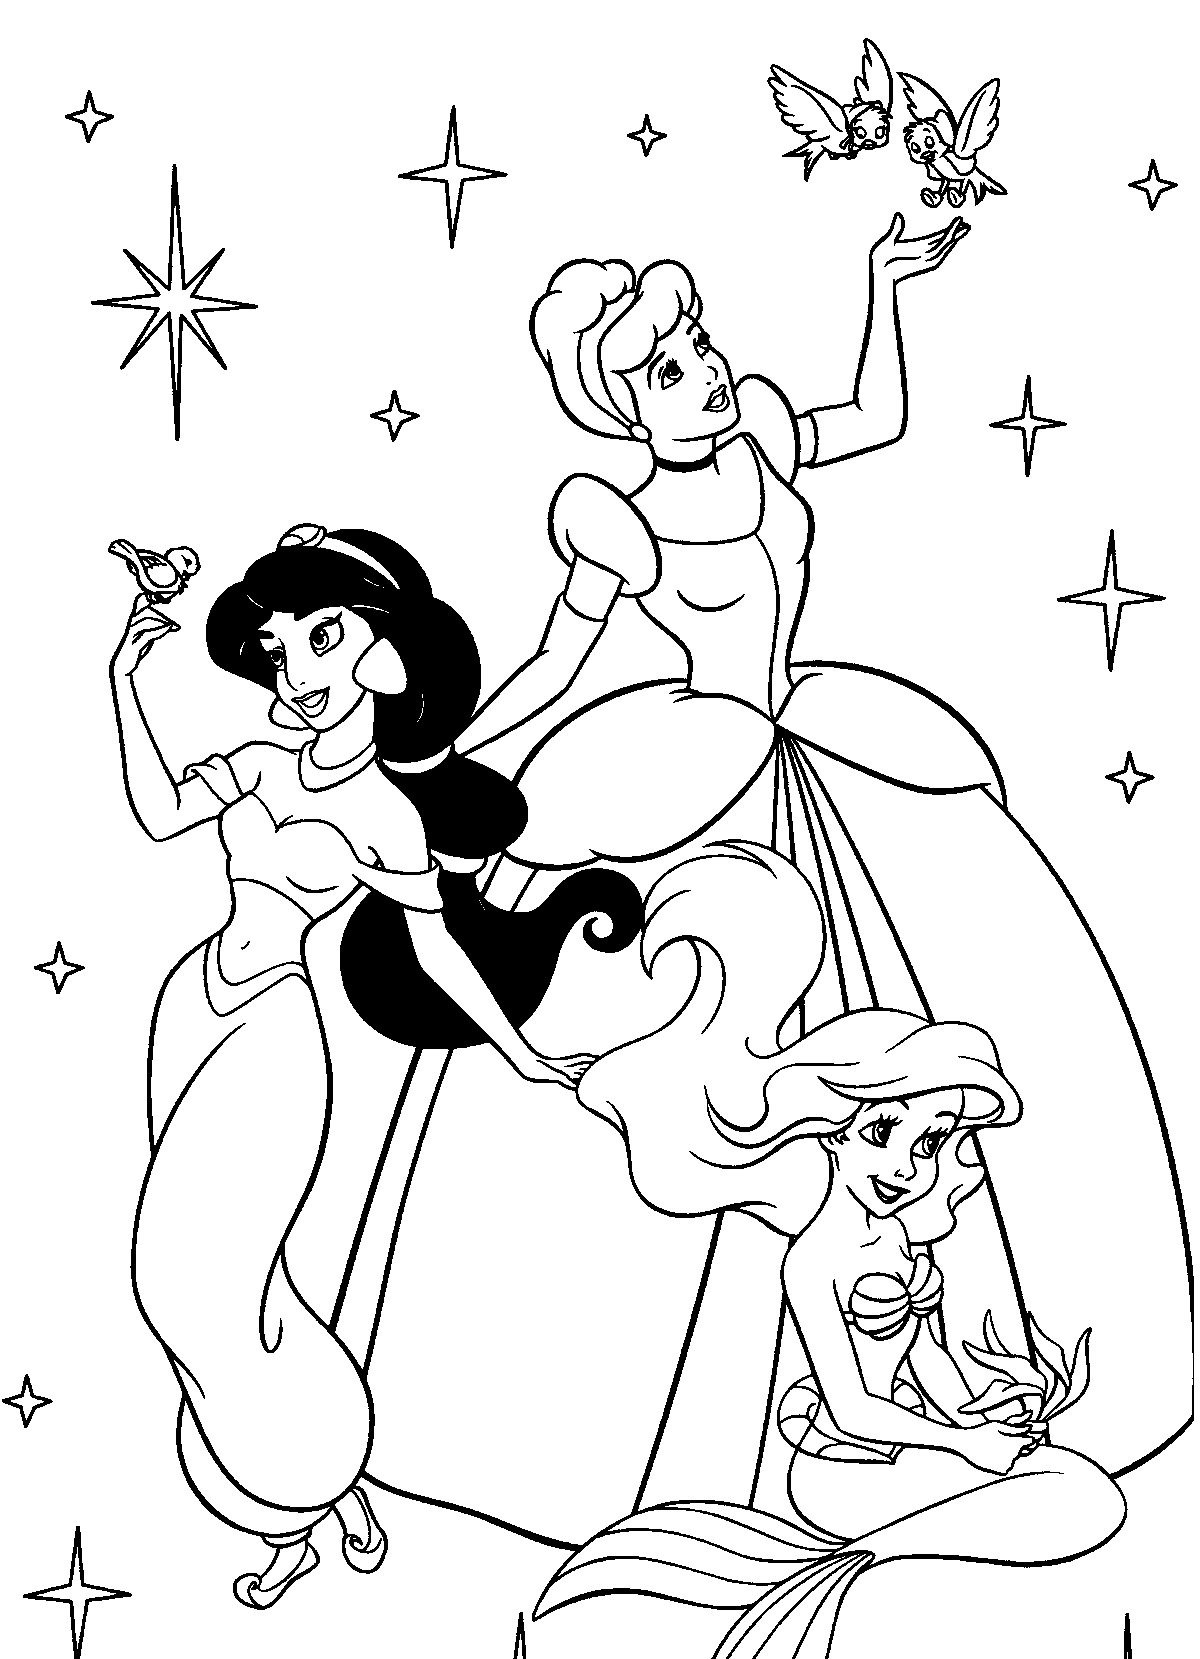 Coloring Sheets For Girls Printable Chistmas
 girls princess coloring pages Free Coloring Sheets